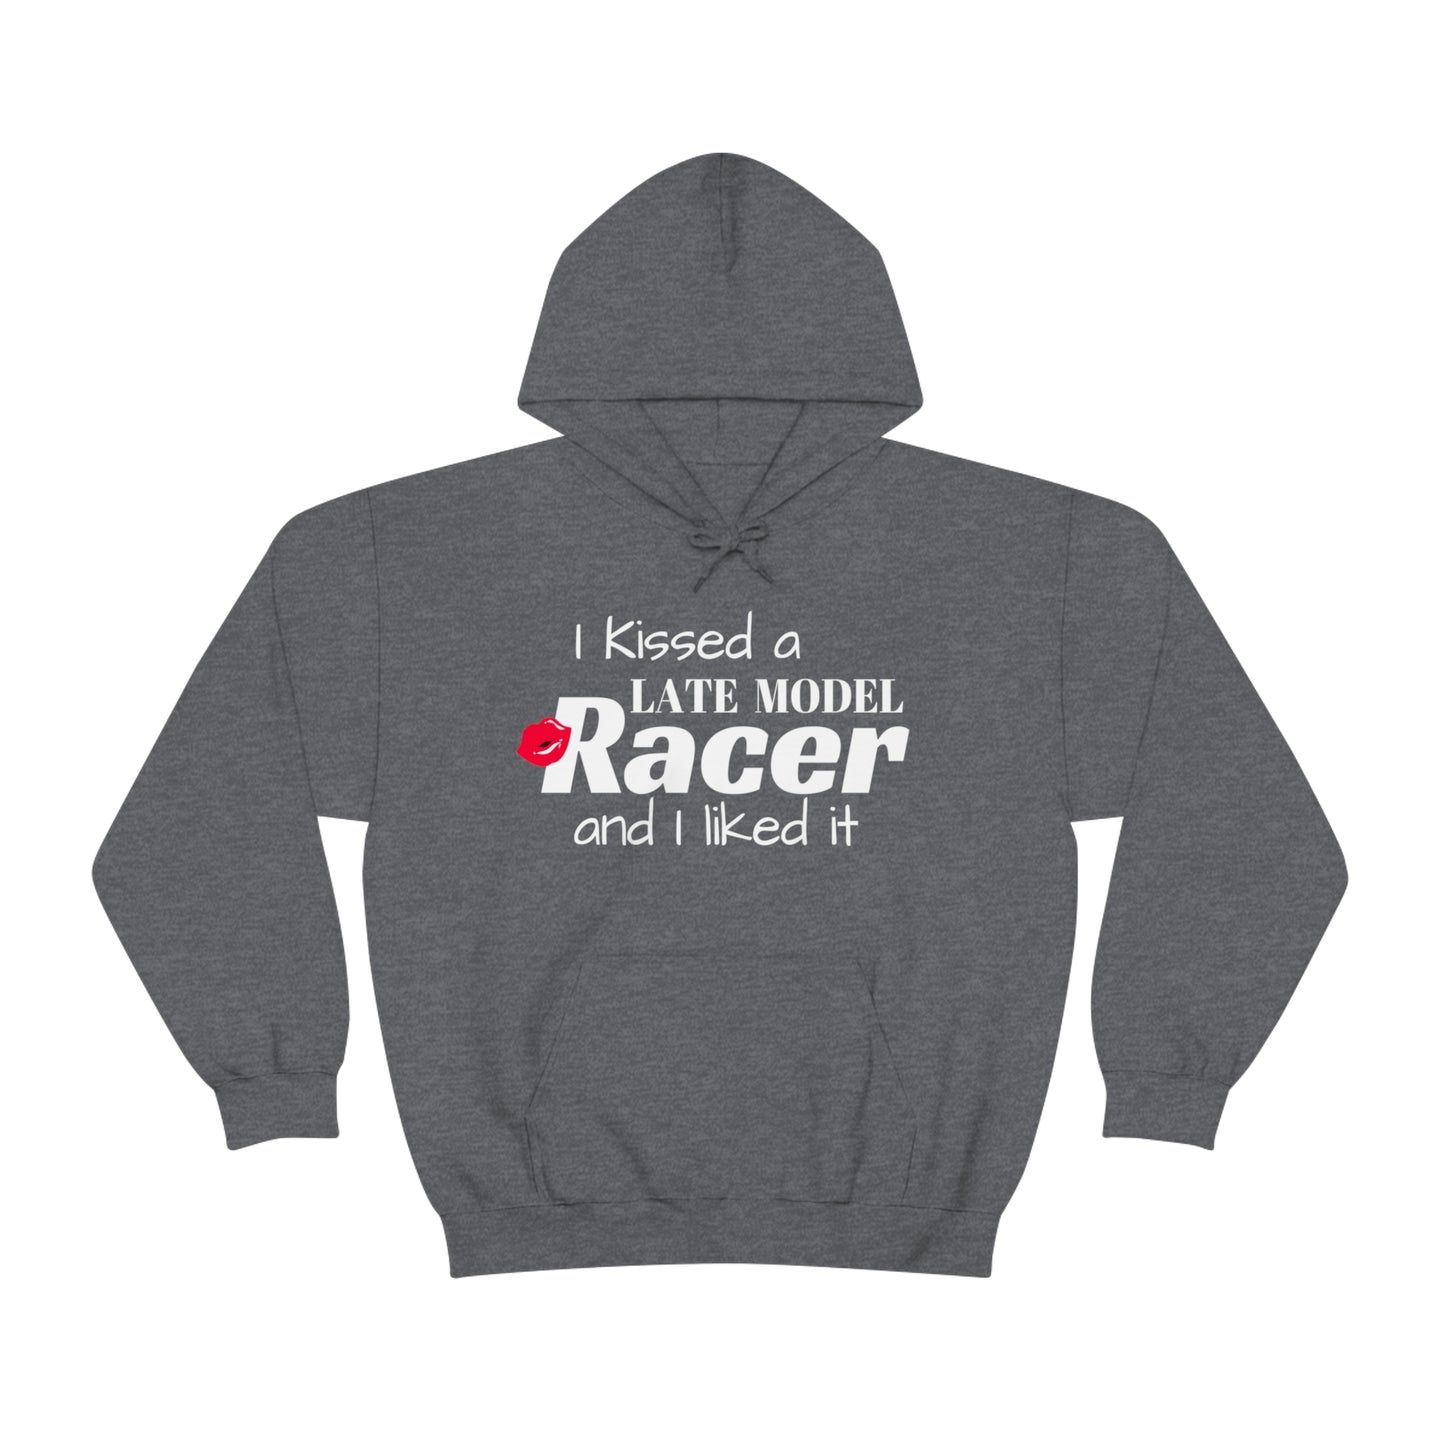 I Kissed A Late Model Racer And I Liked It Hooded Sweatshirt